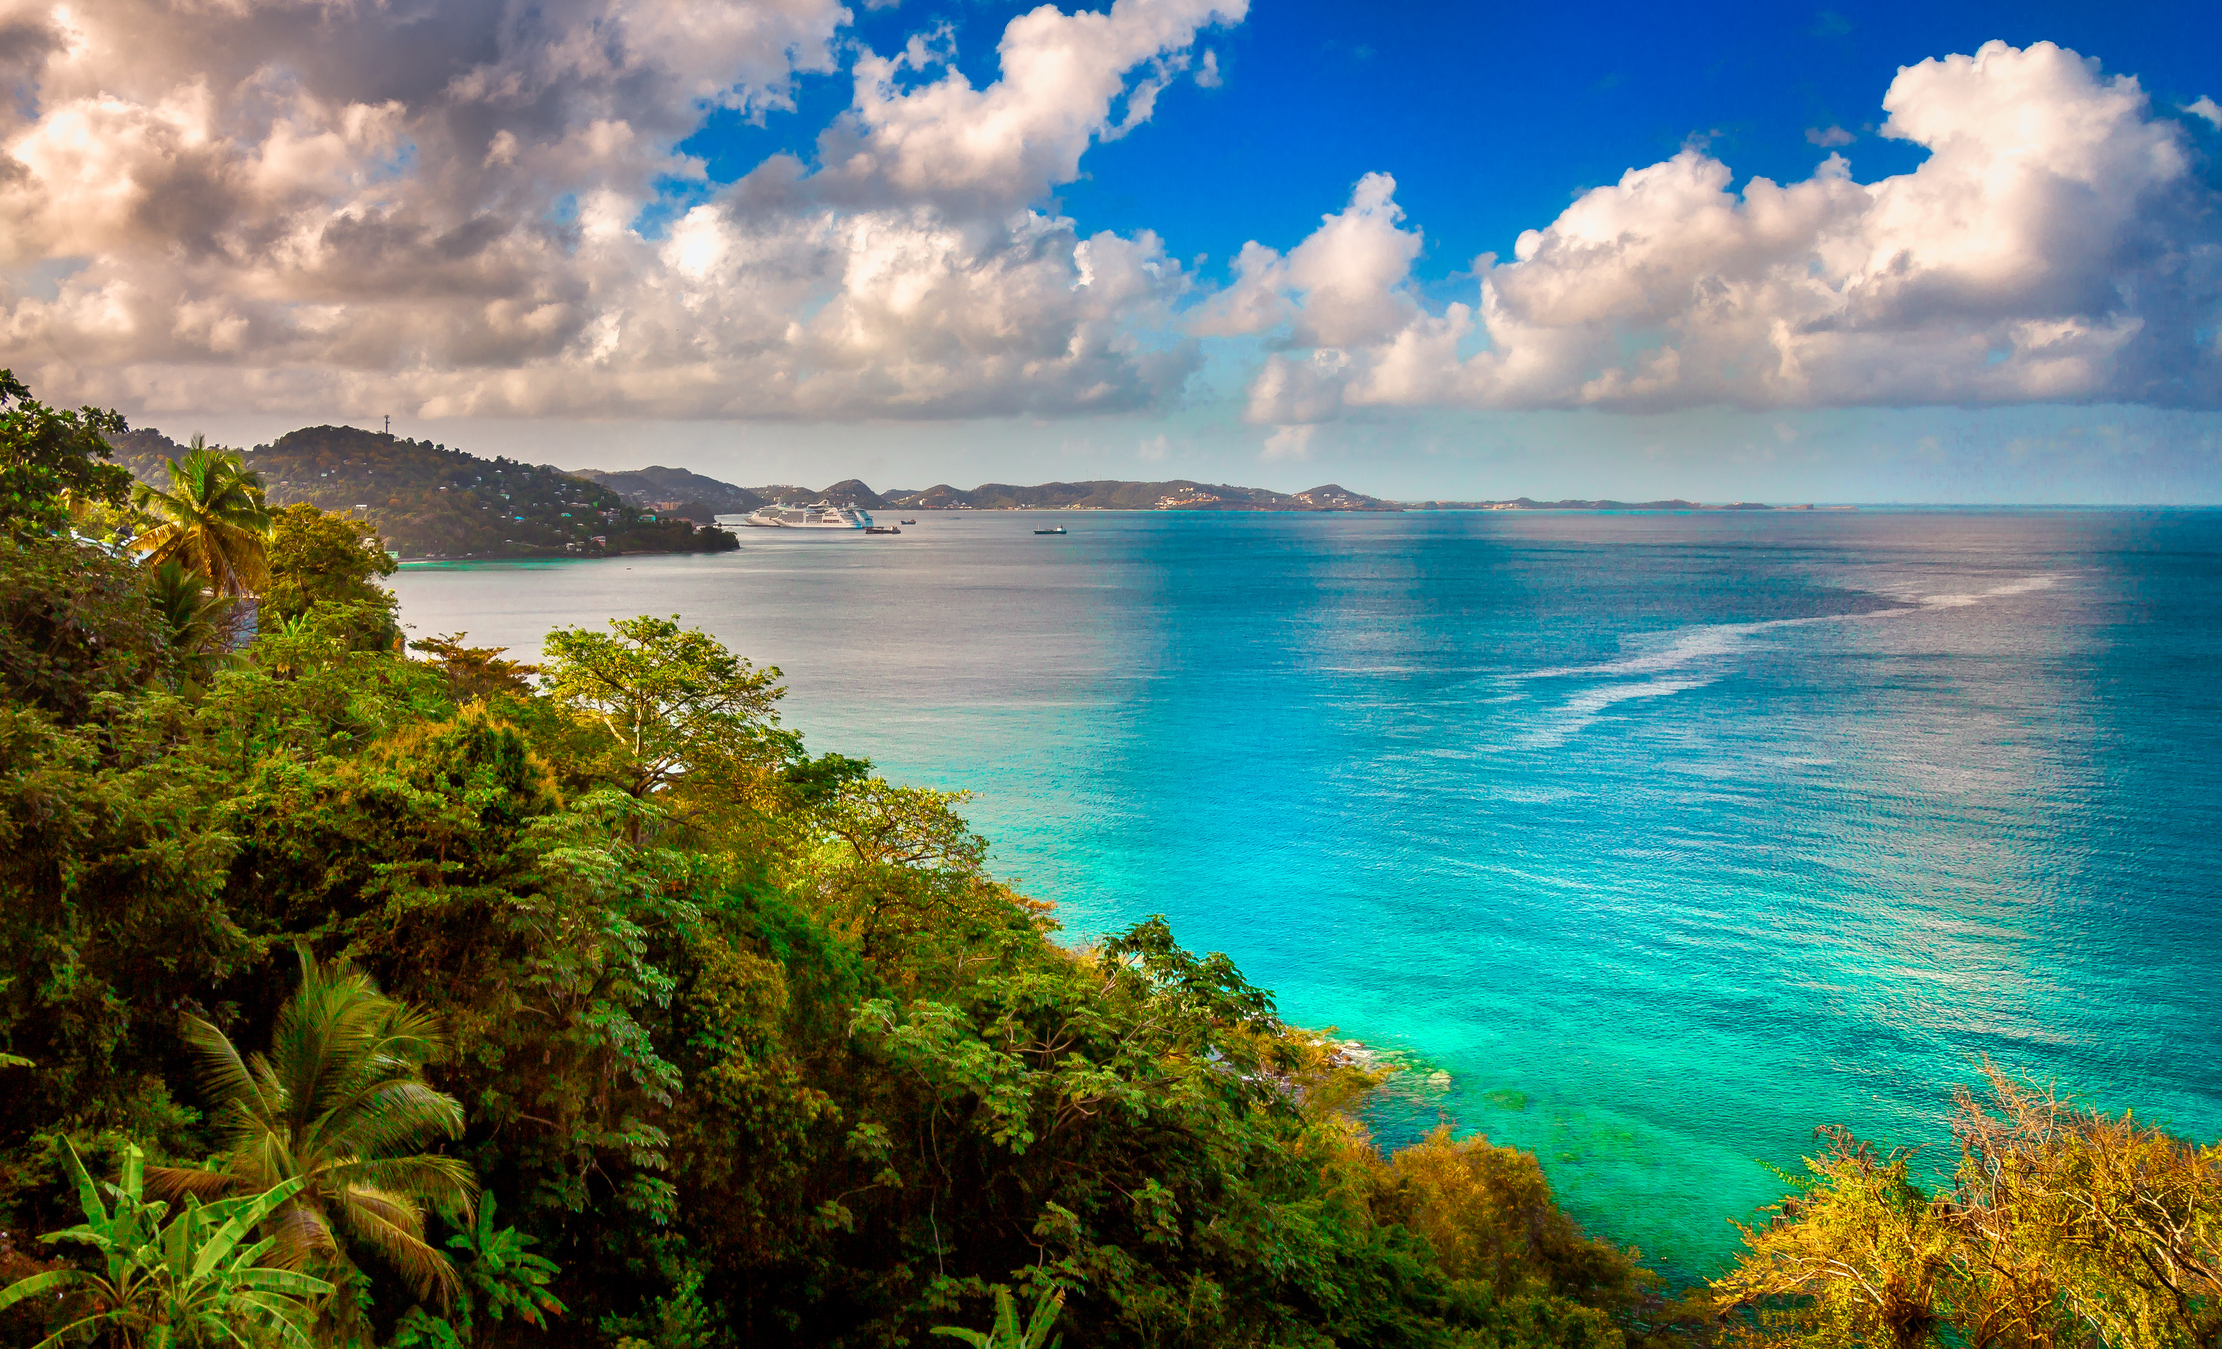 Seascape view with lush foliage in the foreground overlooking a calm ocean with distant hills